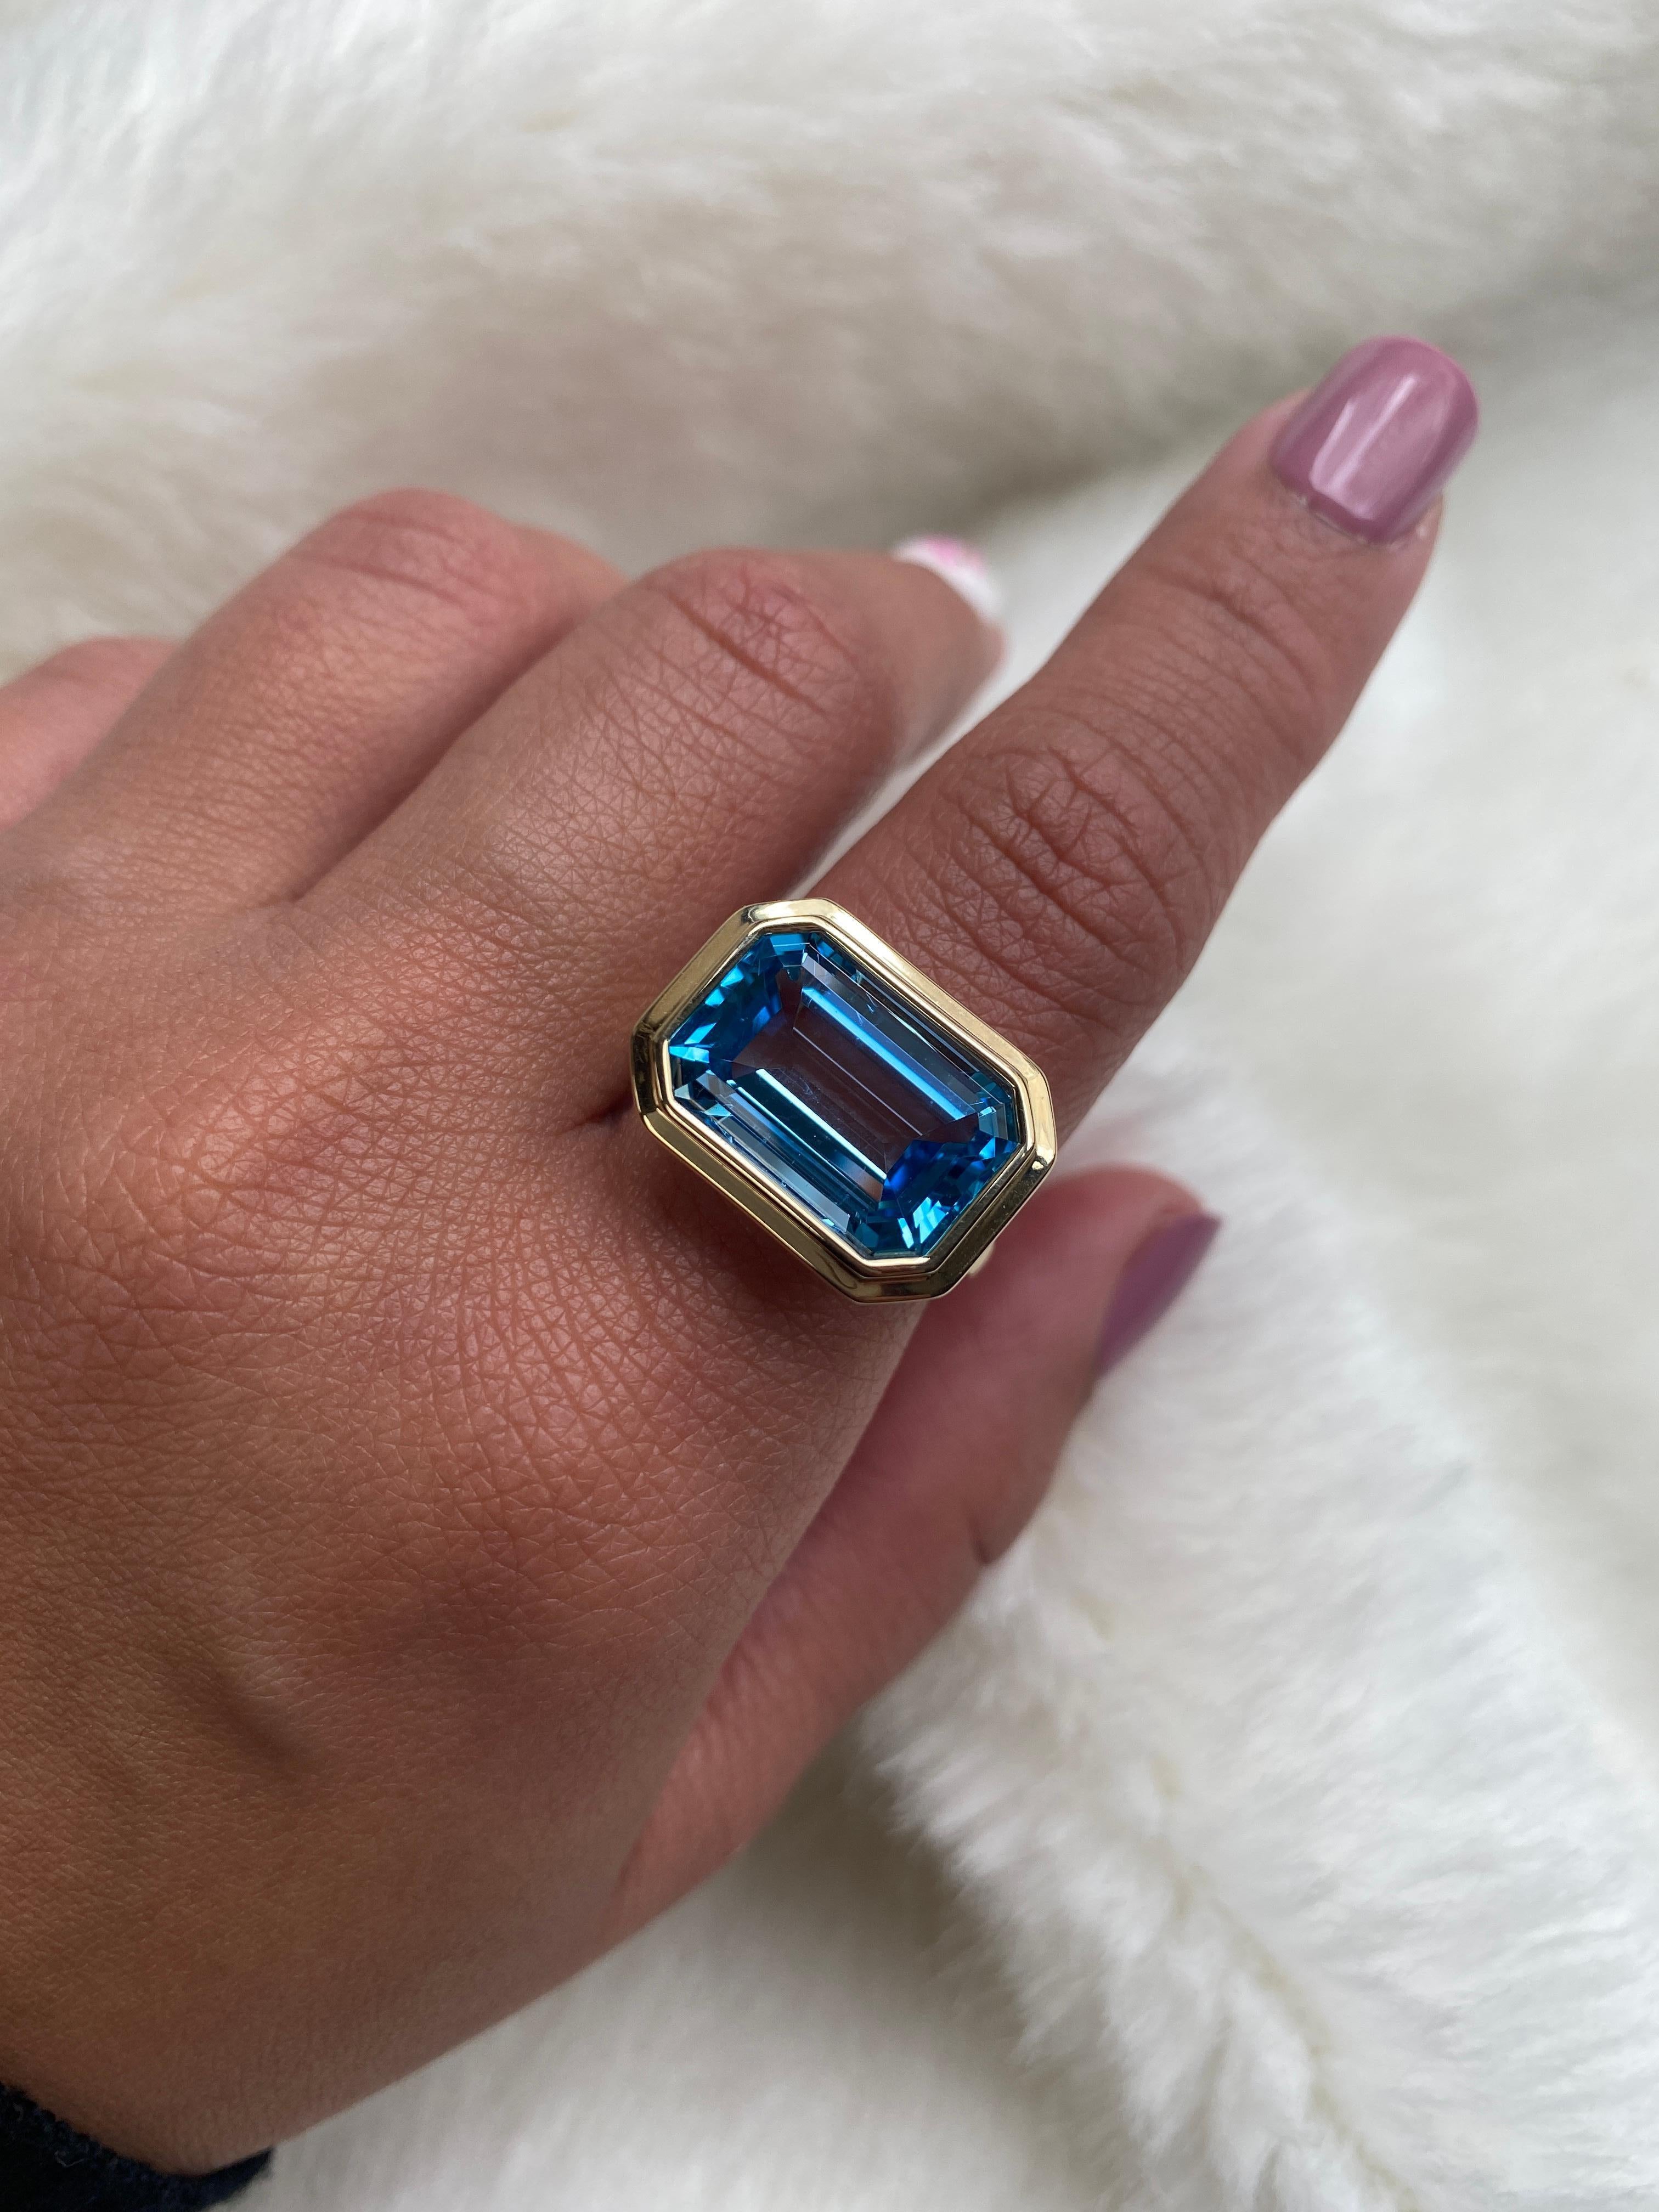 East-West Blue Topaz Emerald Cut Bezel Set Ring in 18K Yellow Gold, from 'Manhattan' Collection.  Minimalist lines yet bold structures is what our Manhattan Collection is all about. Our pieces represent the famous skyline and cityscapes of New York